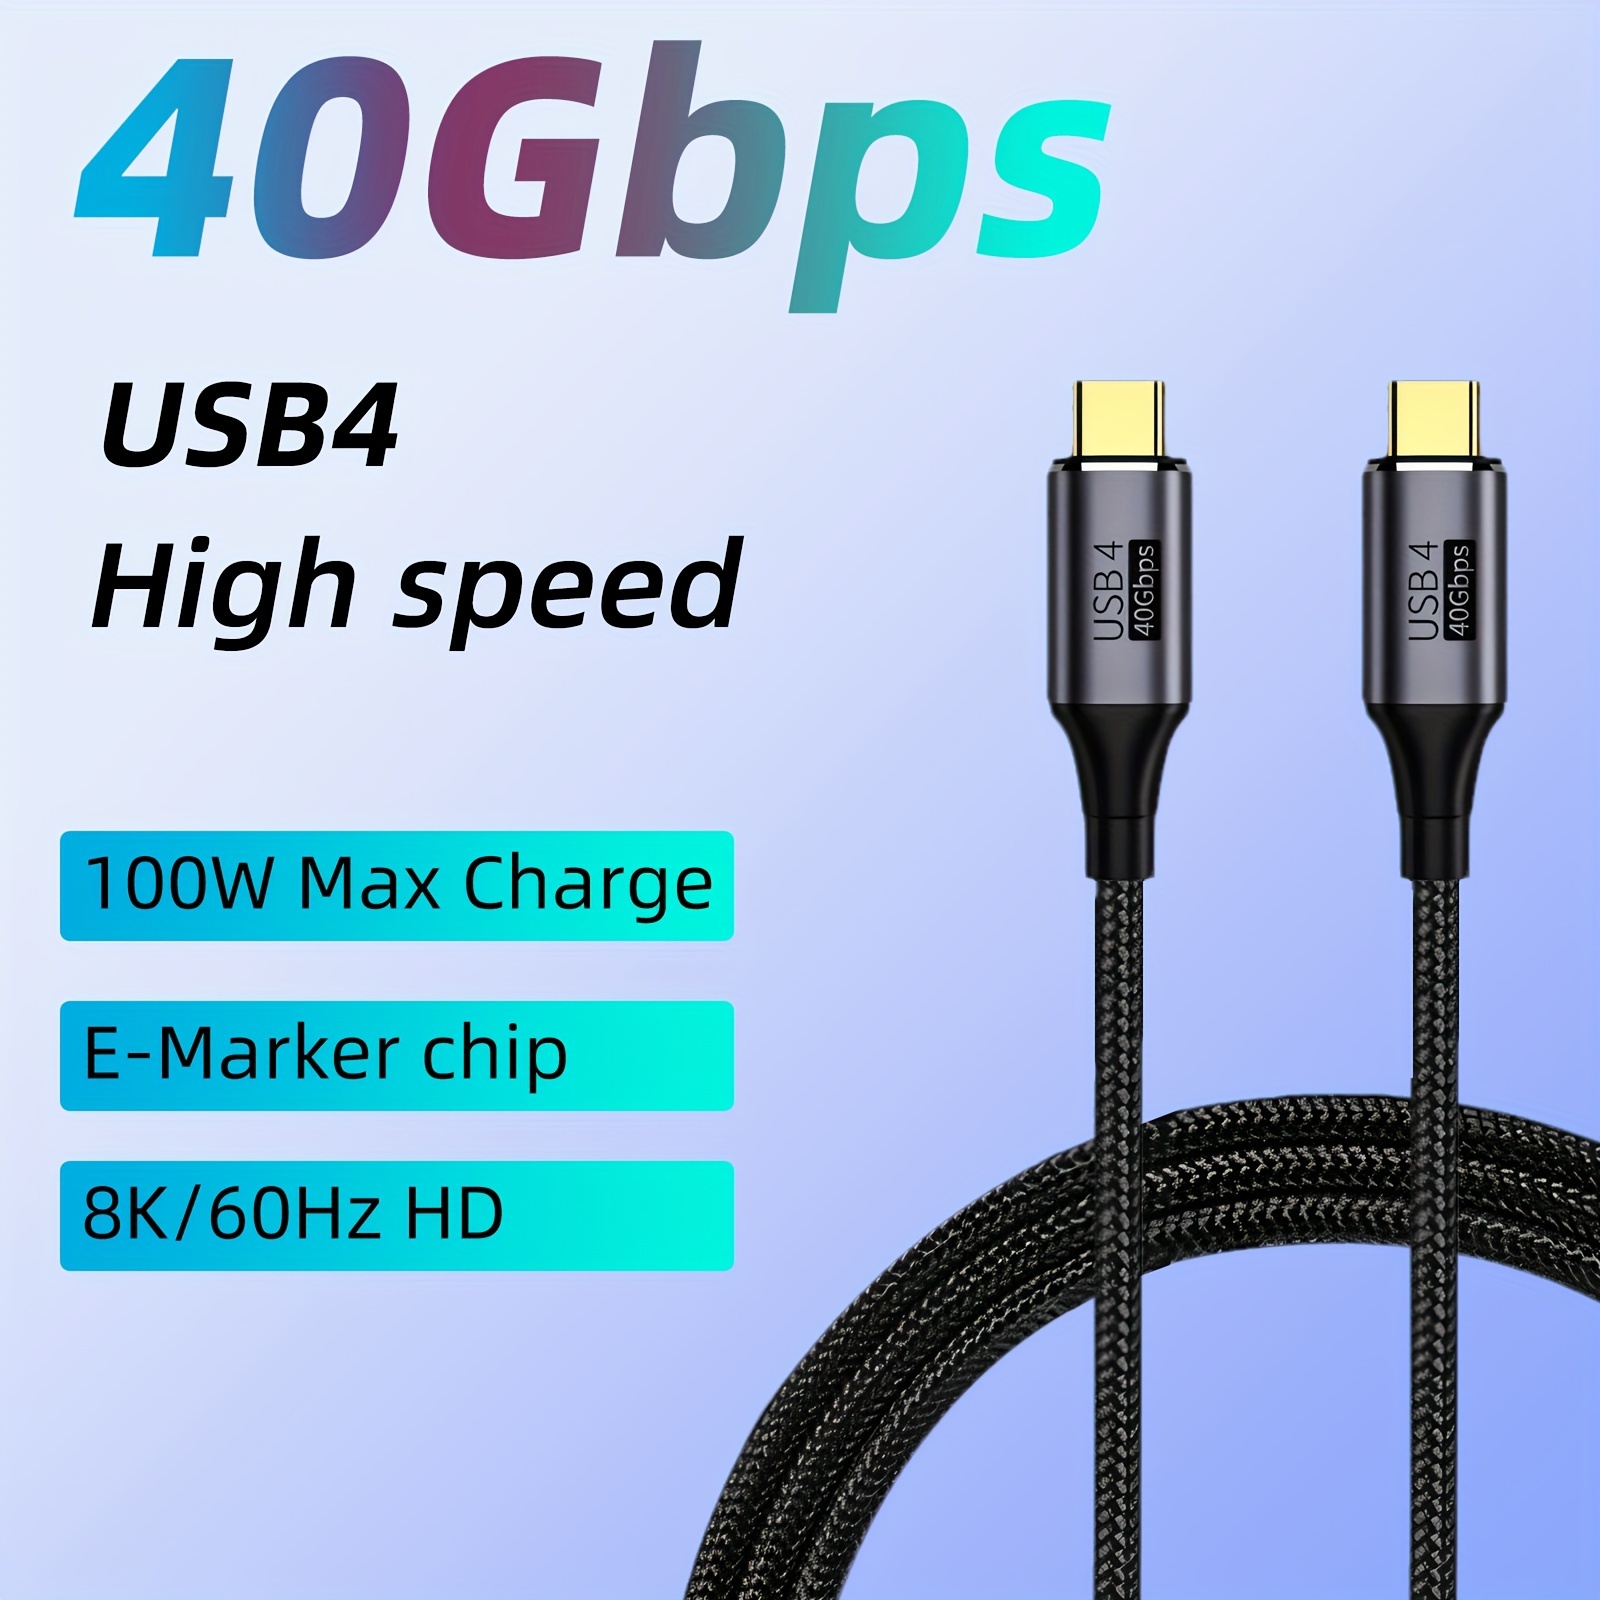 SOOPII USB 4 Cable with LED Display,Supports 8K Video,Max 40Gbps Data  Transfer,240W USB C to USB C Charging Cable,Compatible with lPhone